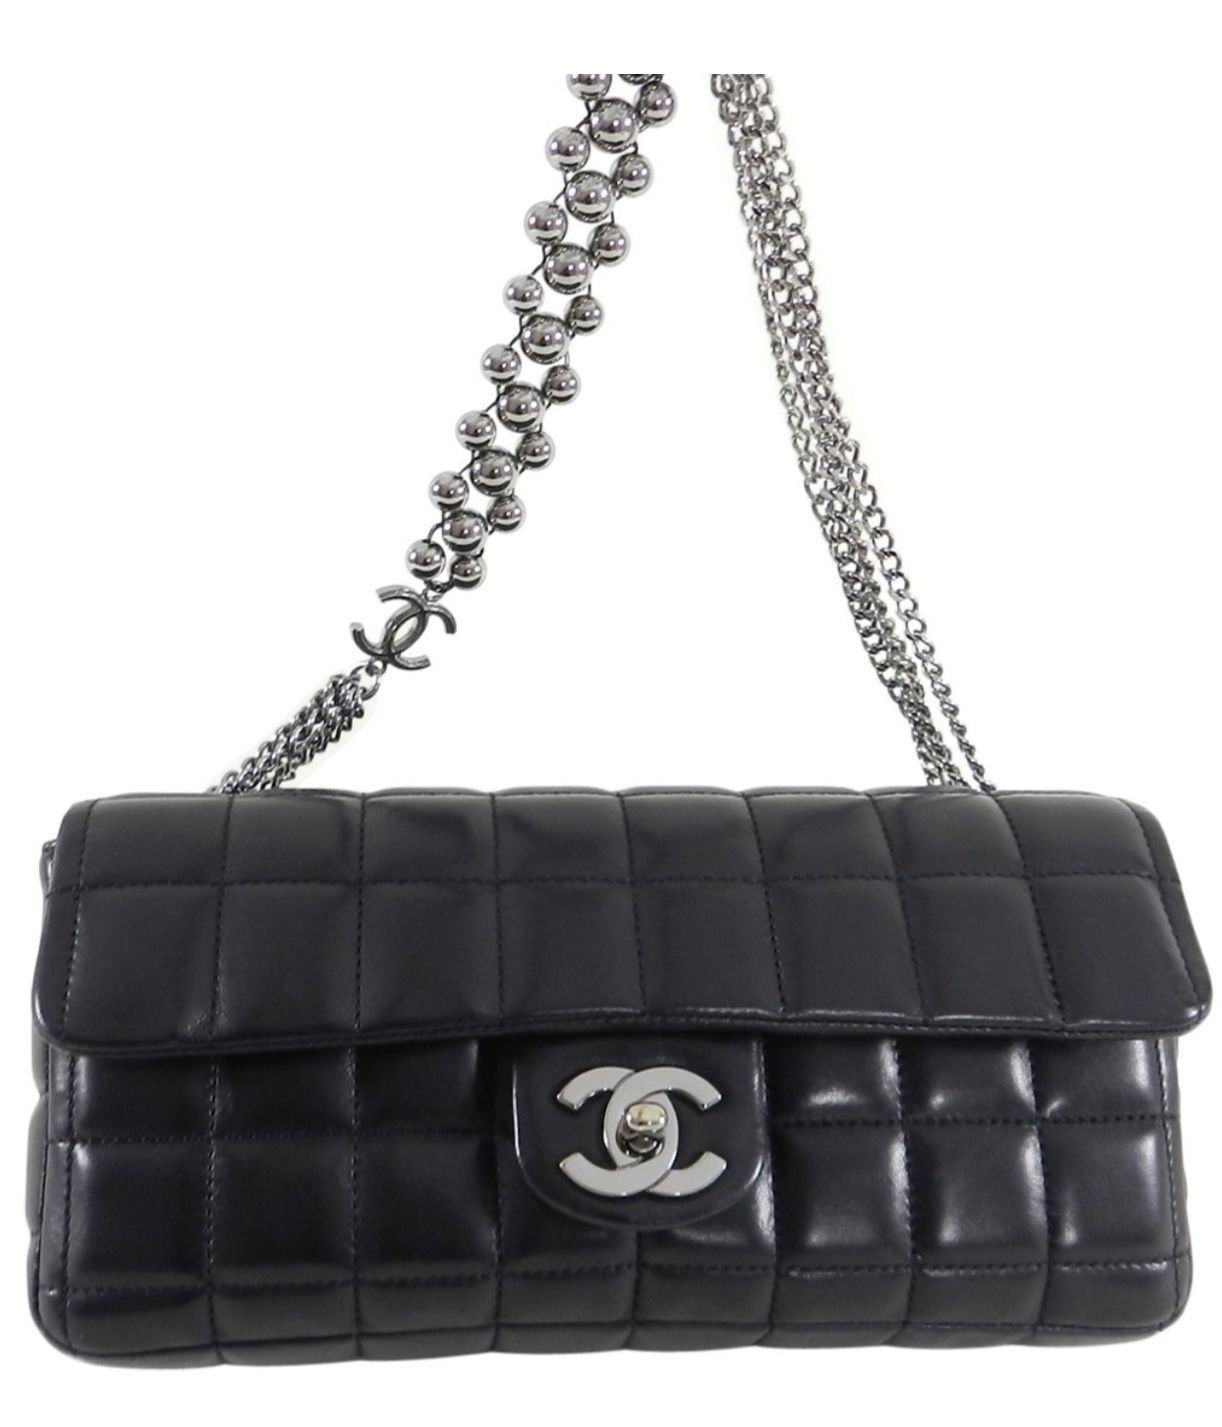 WOW Chanel chocolate bar East West pearl chain shoulder bag